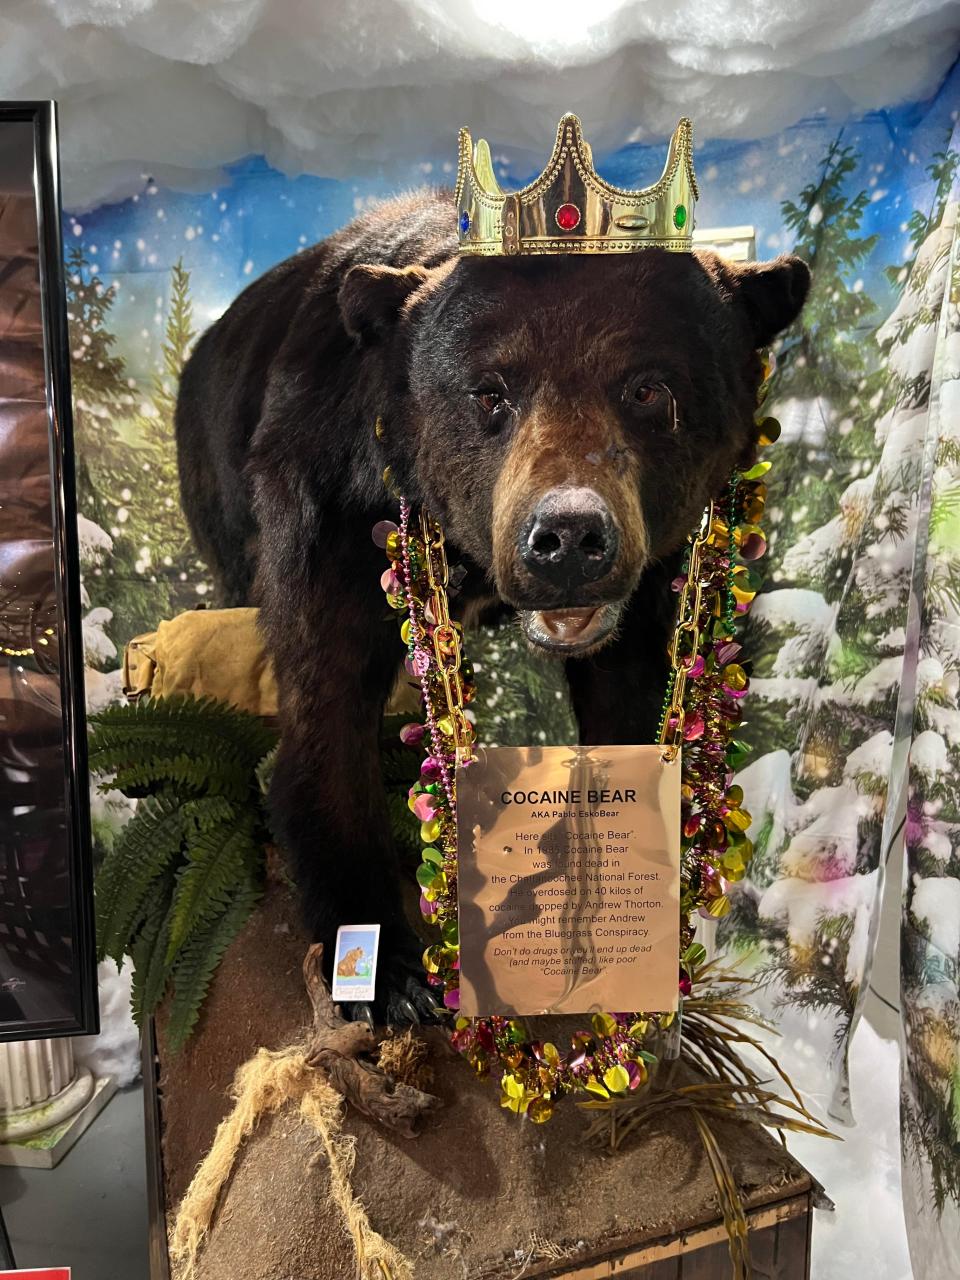 A stuffed bear wearing a gold chain and sign as well as a crown stands in a display. it also has mardi gras beads on it. (Courtesy of Courtney Oldendorf)